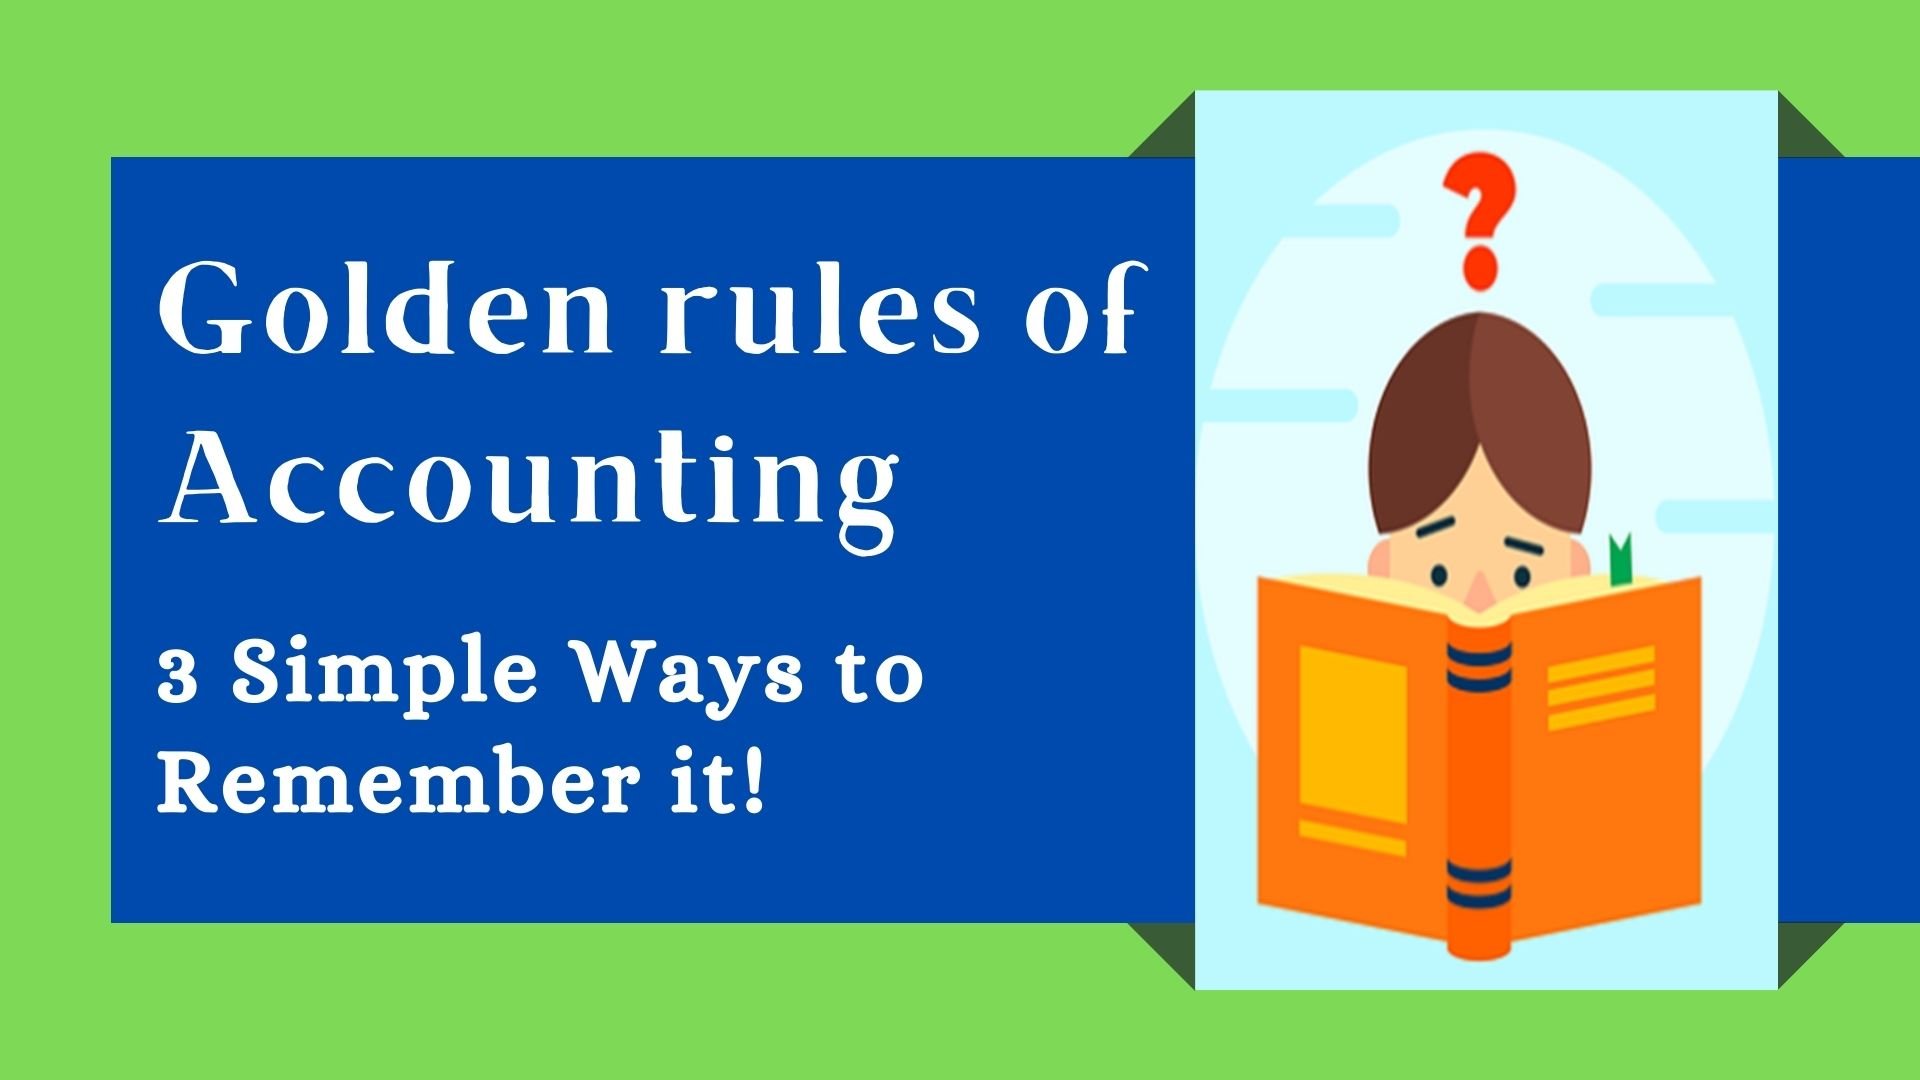 Golden rules of Accounting